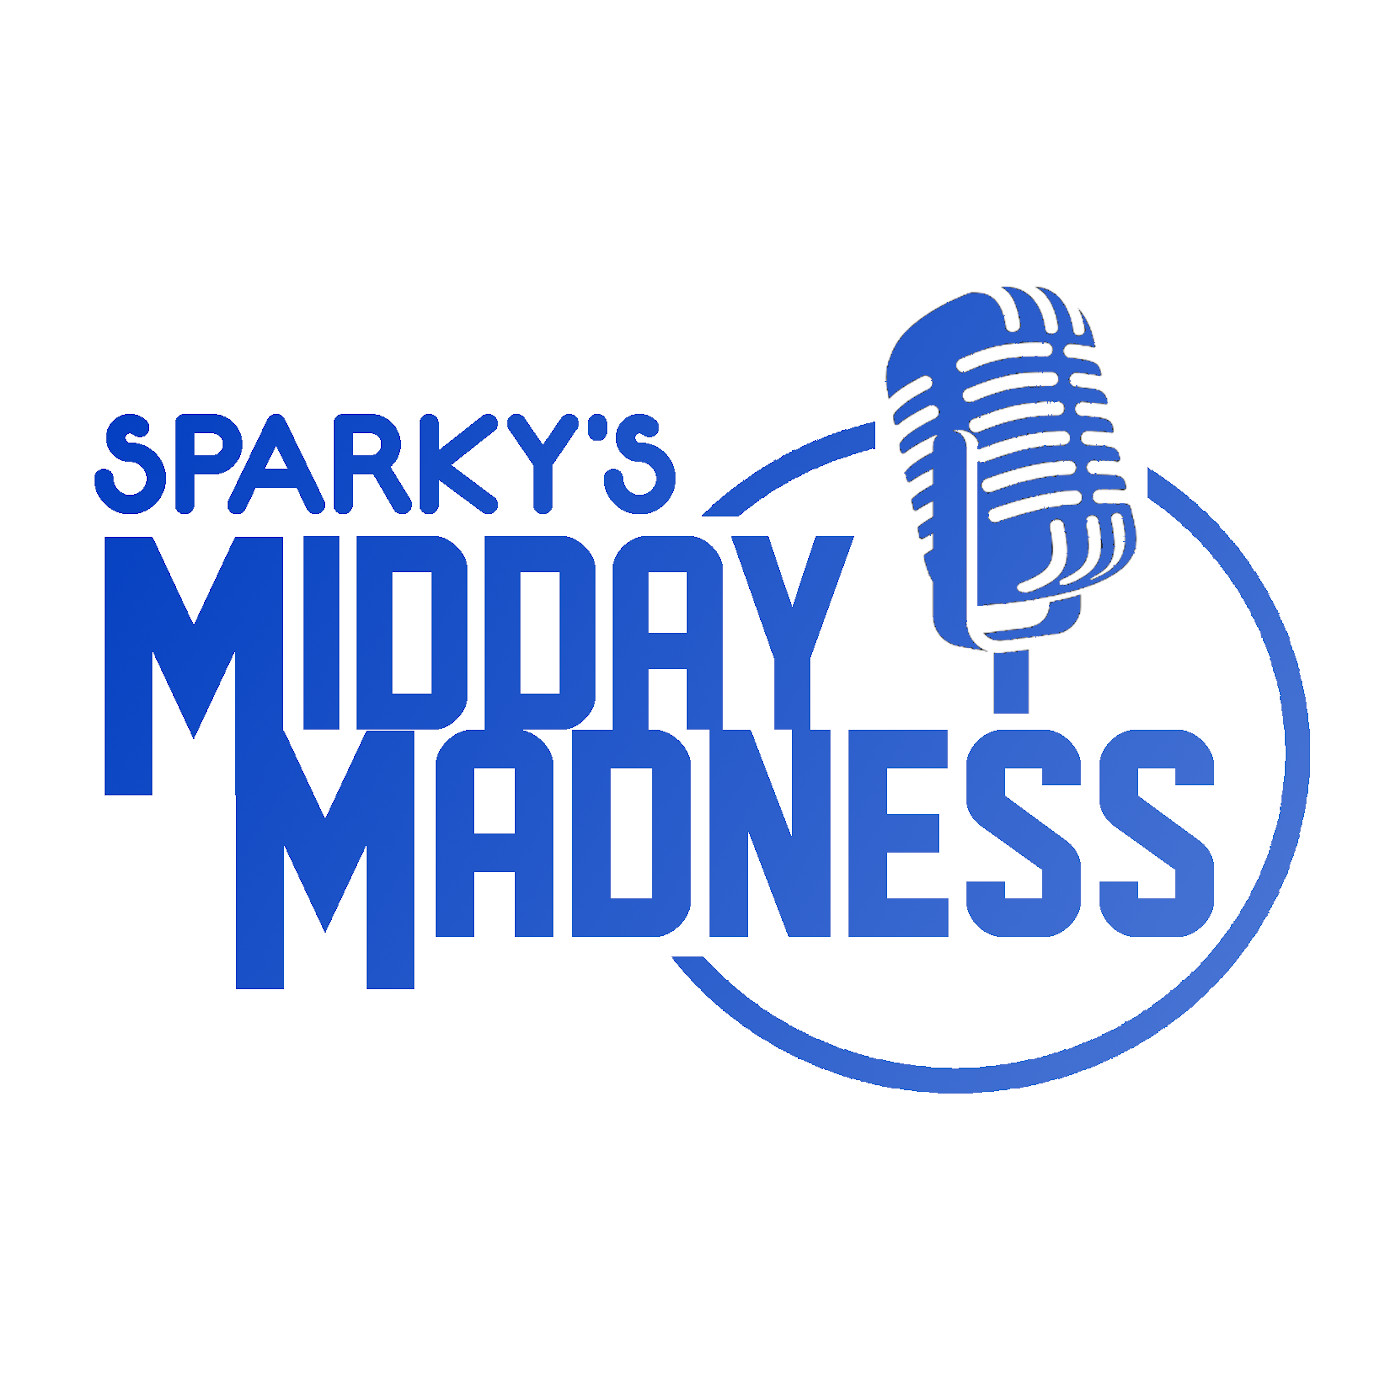 8-12-22 Sparky's Midday Madness - Packers Or Brewers On The TV Tonight?